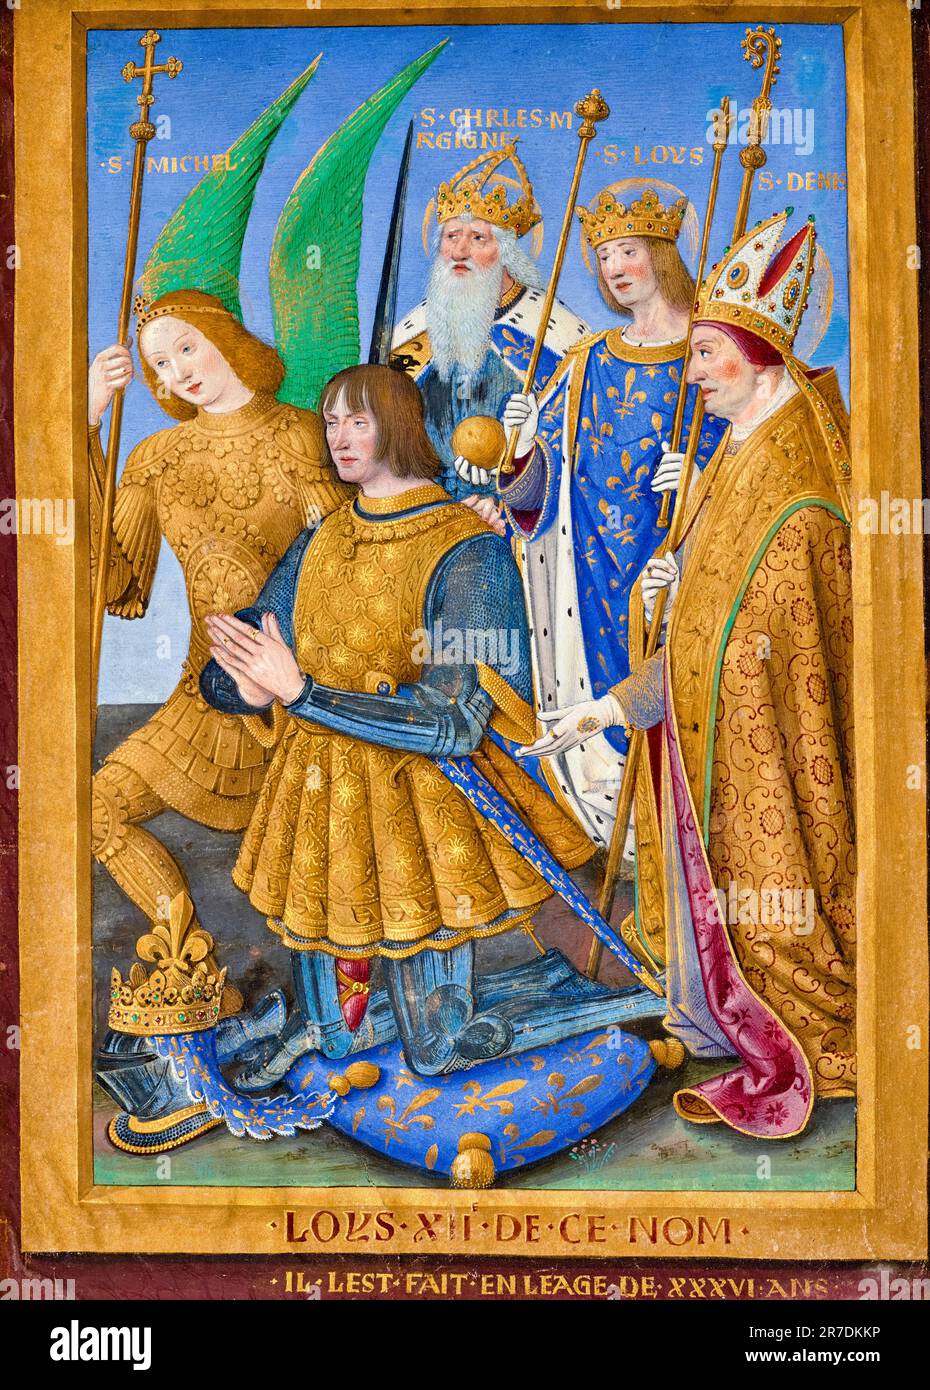 Jean Bourdichon, Louis XII of France Kneeling in Prayer, Accompanied by Saints Michael, Charlemagne, Louis and Denis, illuminated manuscript in tempera and gold, 1498-1499 Stock Photo